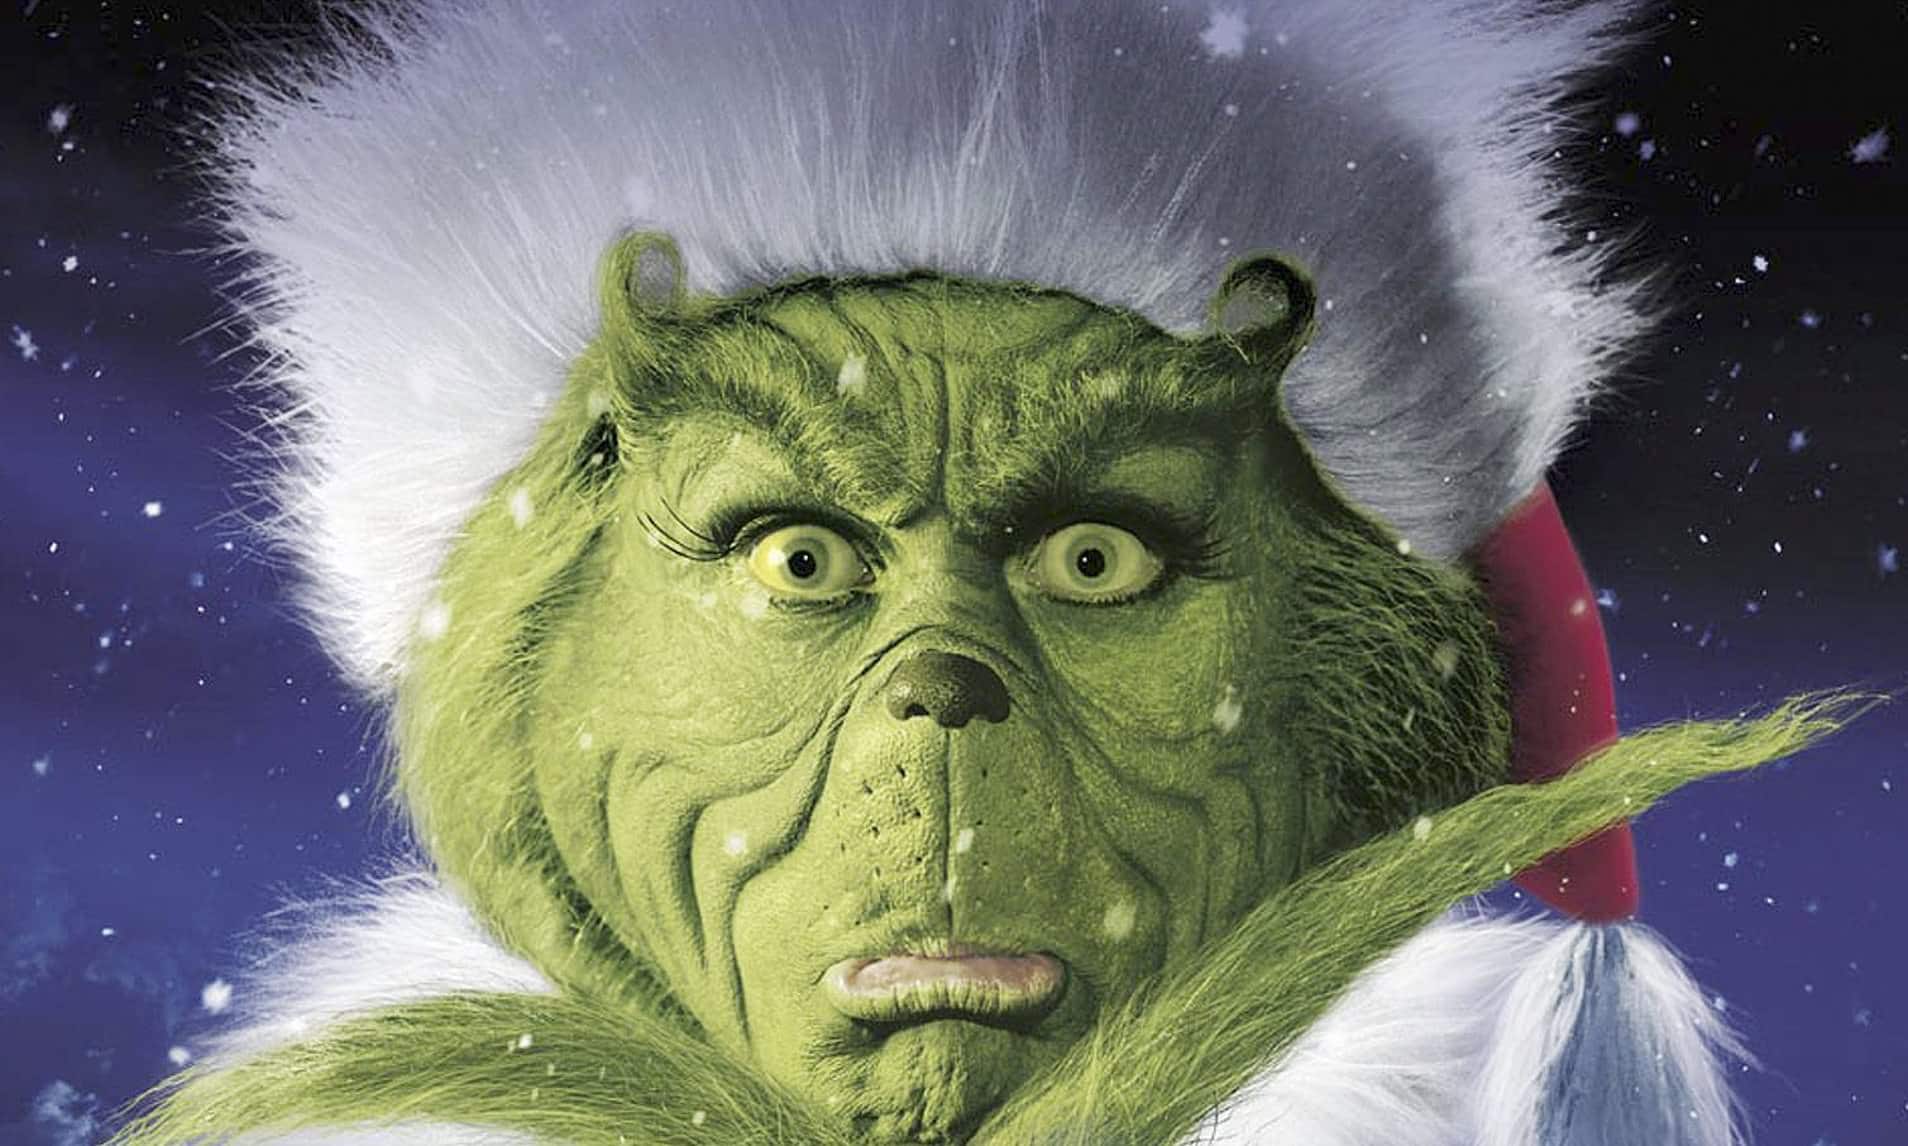 "How The Grinch Stole Christmas" Is A Masterpiece - Animated Times - Where Can I Find How The Grinch Stole Christmas